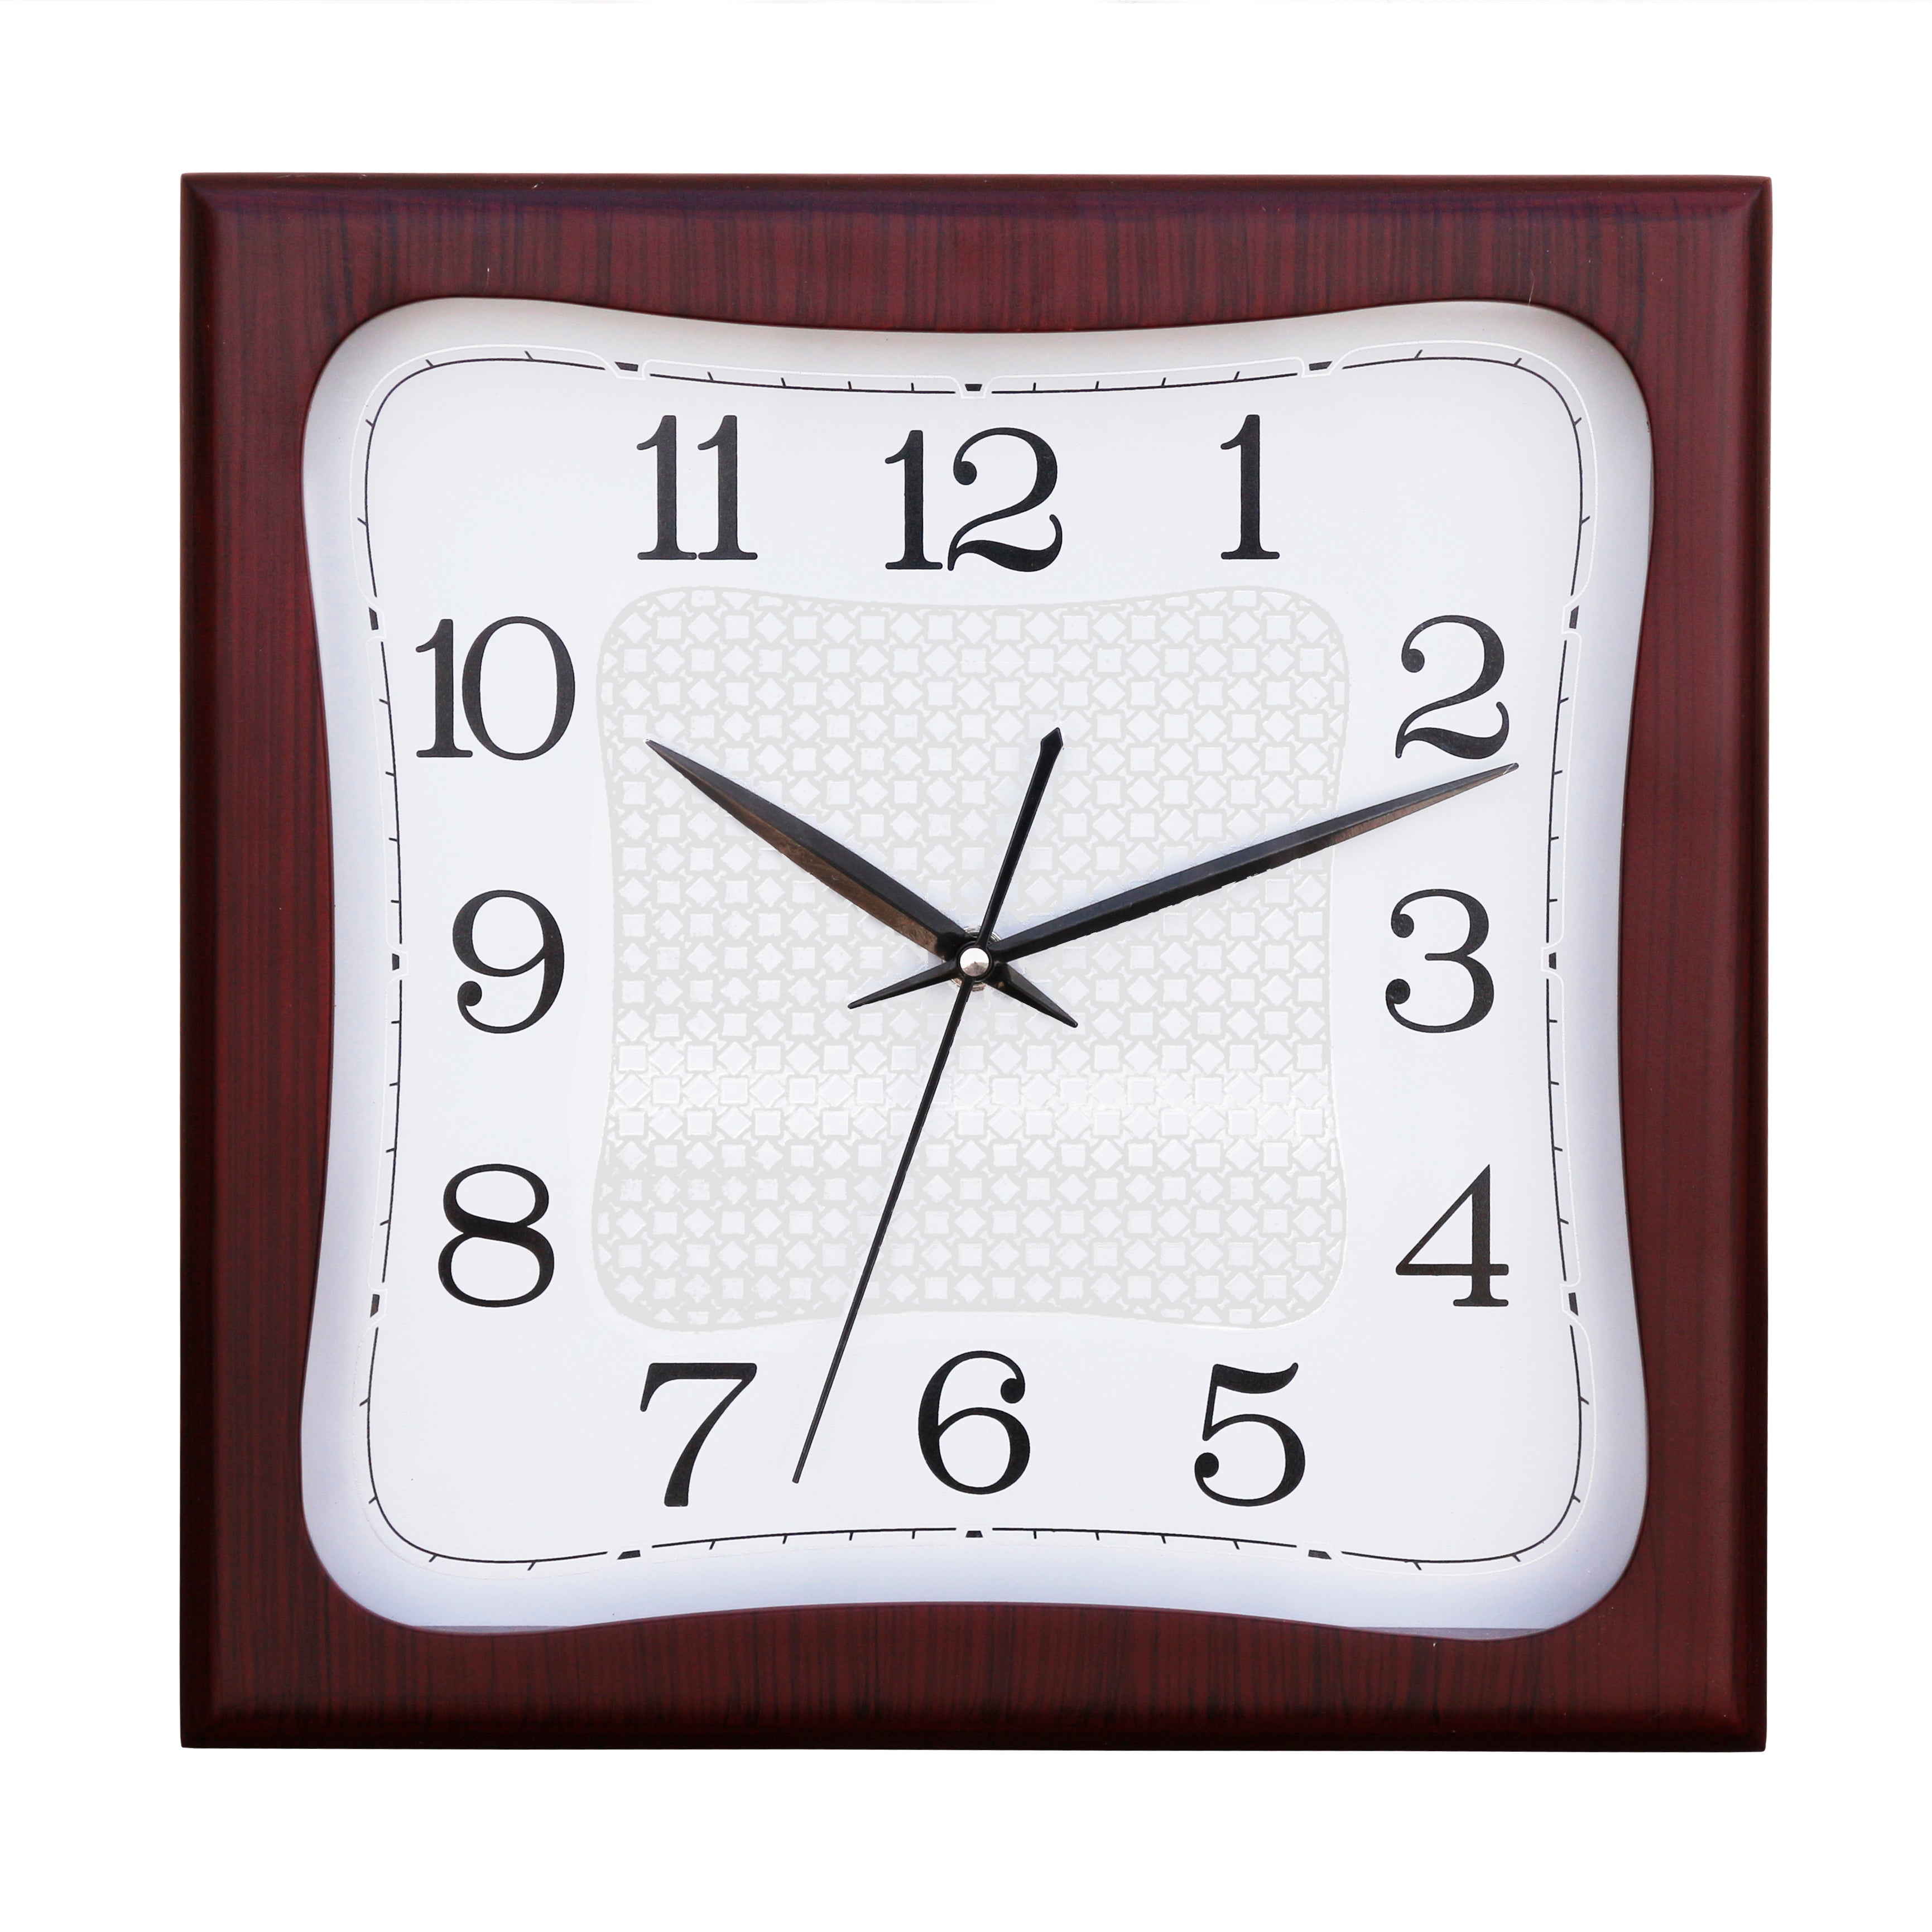 Cola Brown square wooden analog wall clock(28 cm x 28 cm)